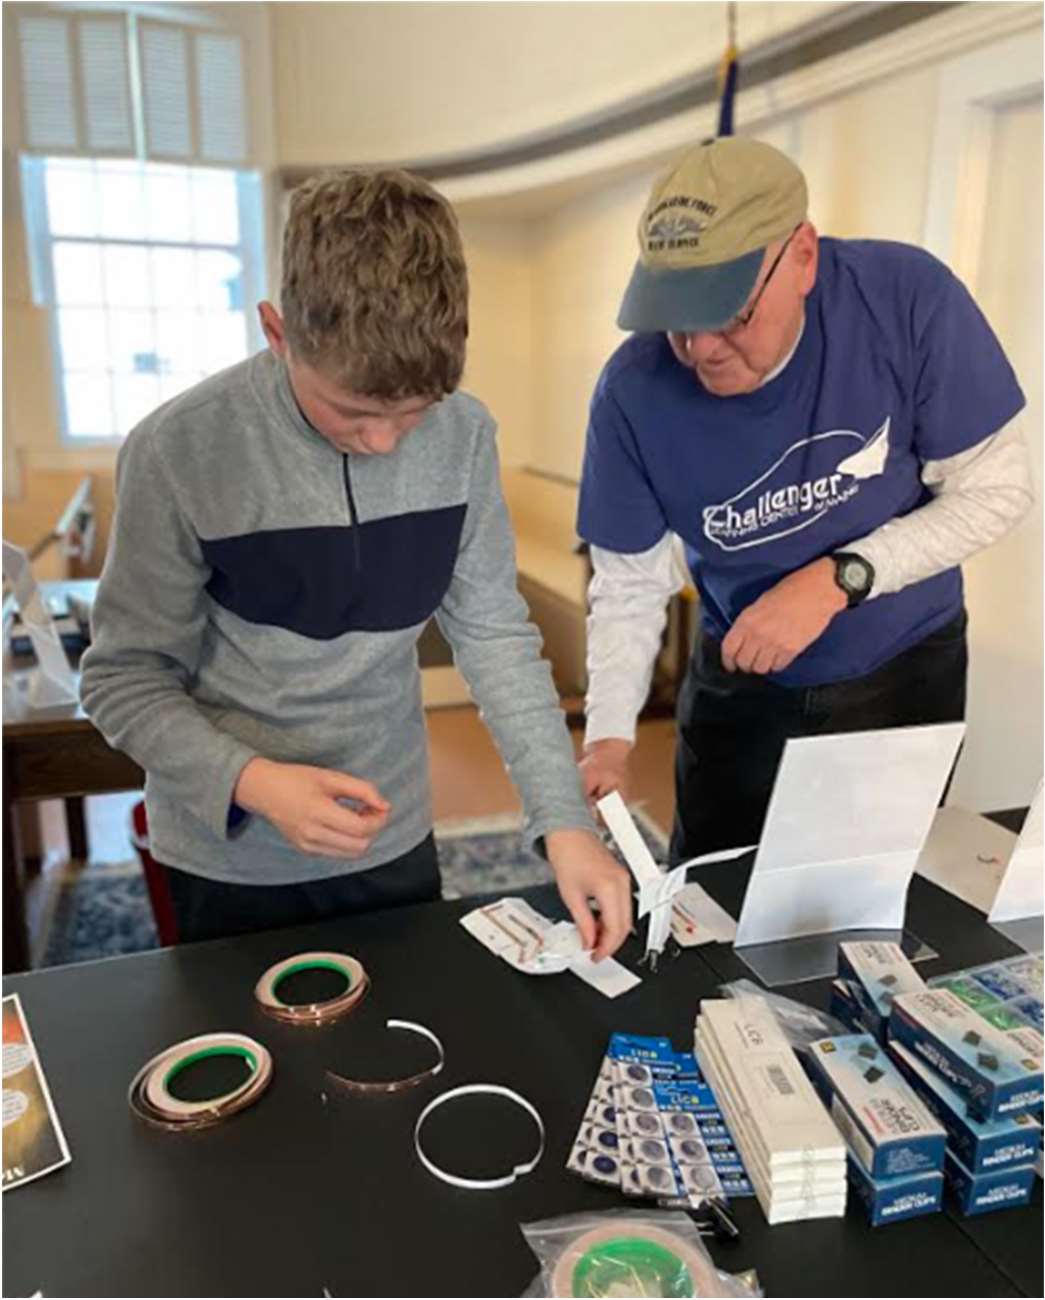 Hudson puts the finishing touches on his Ingenuity Mars Helicopter with volunteer, Bill Shoppmeyer, before it is ready a test flight!